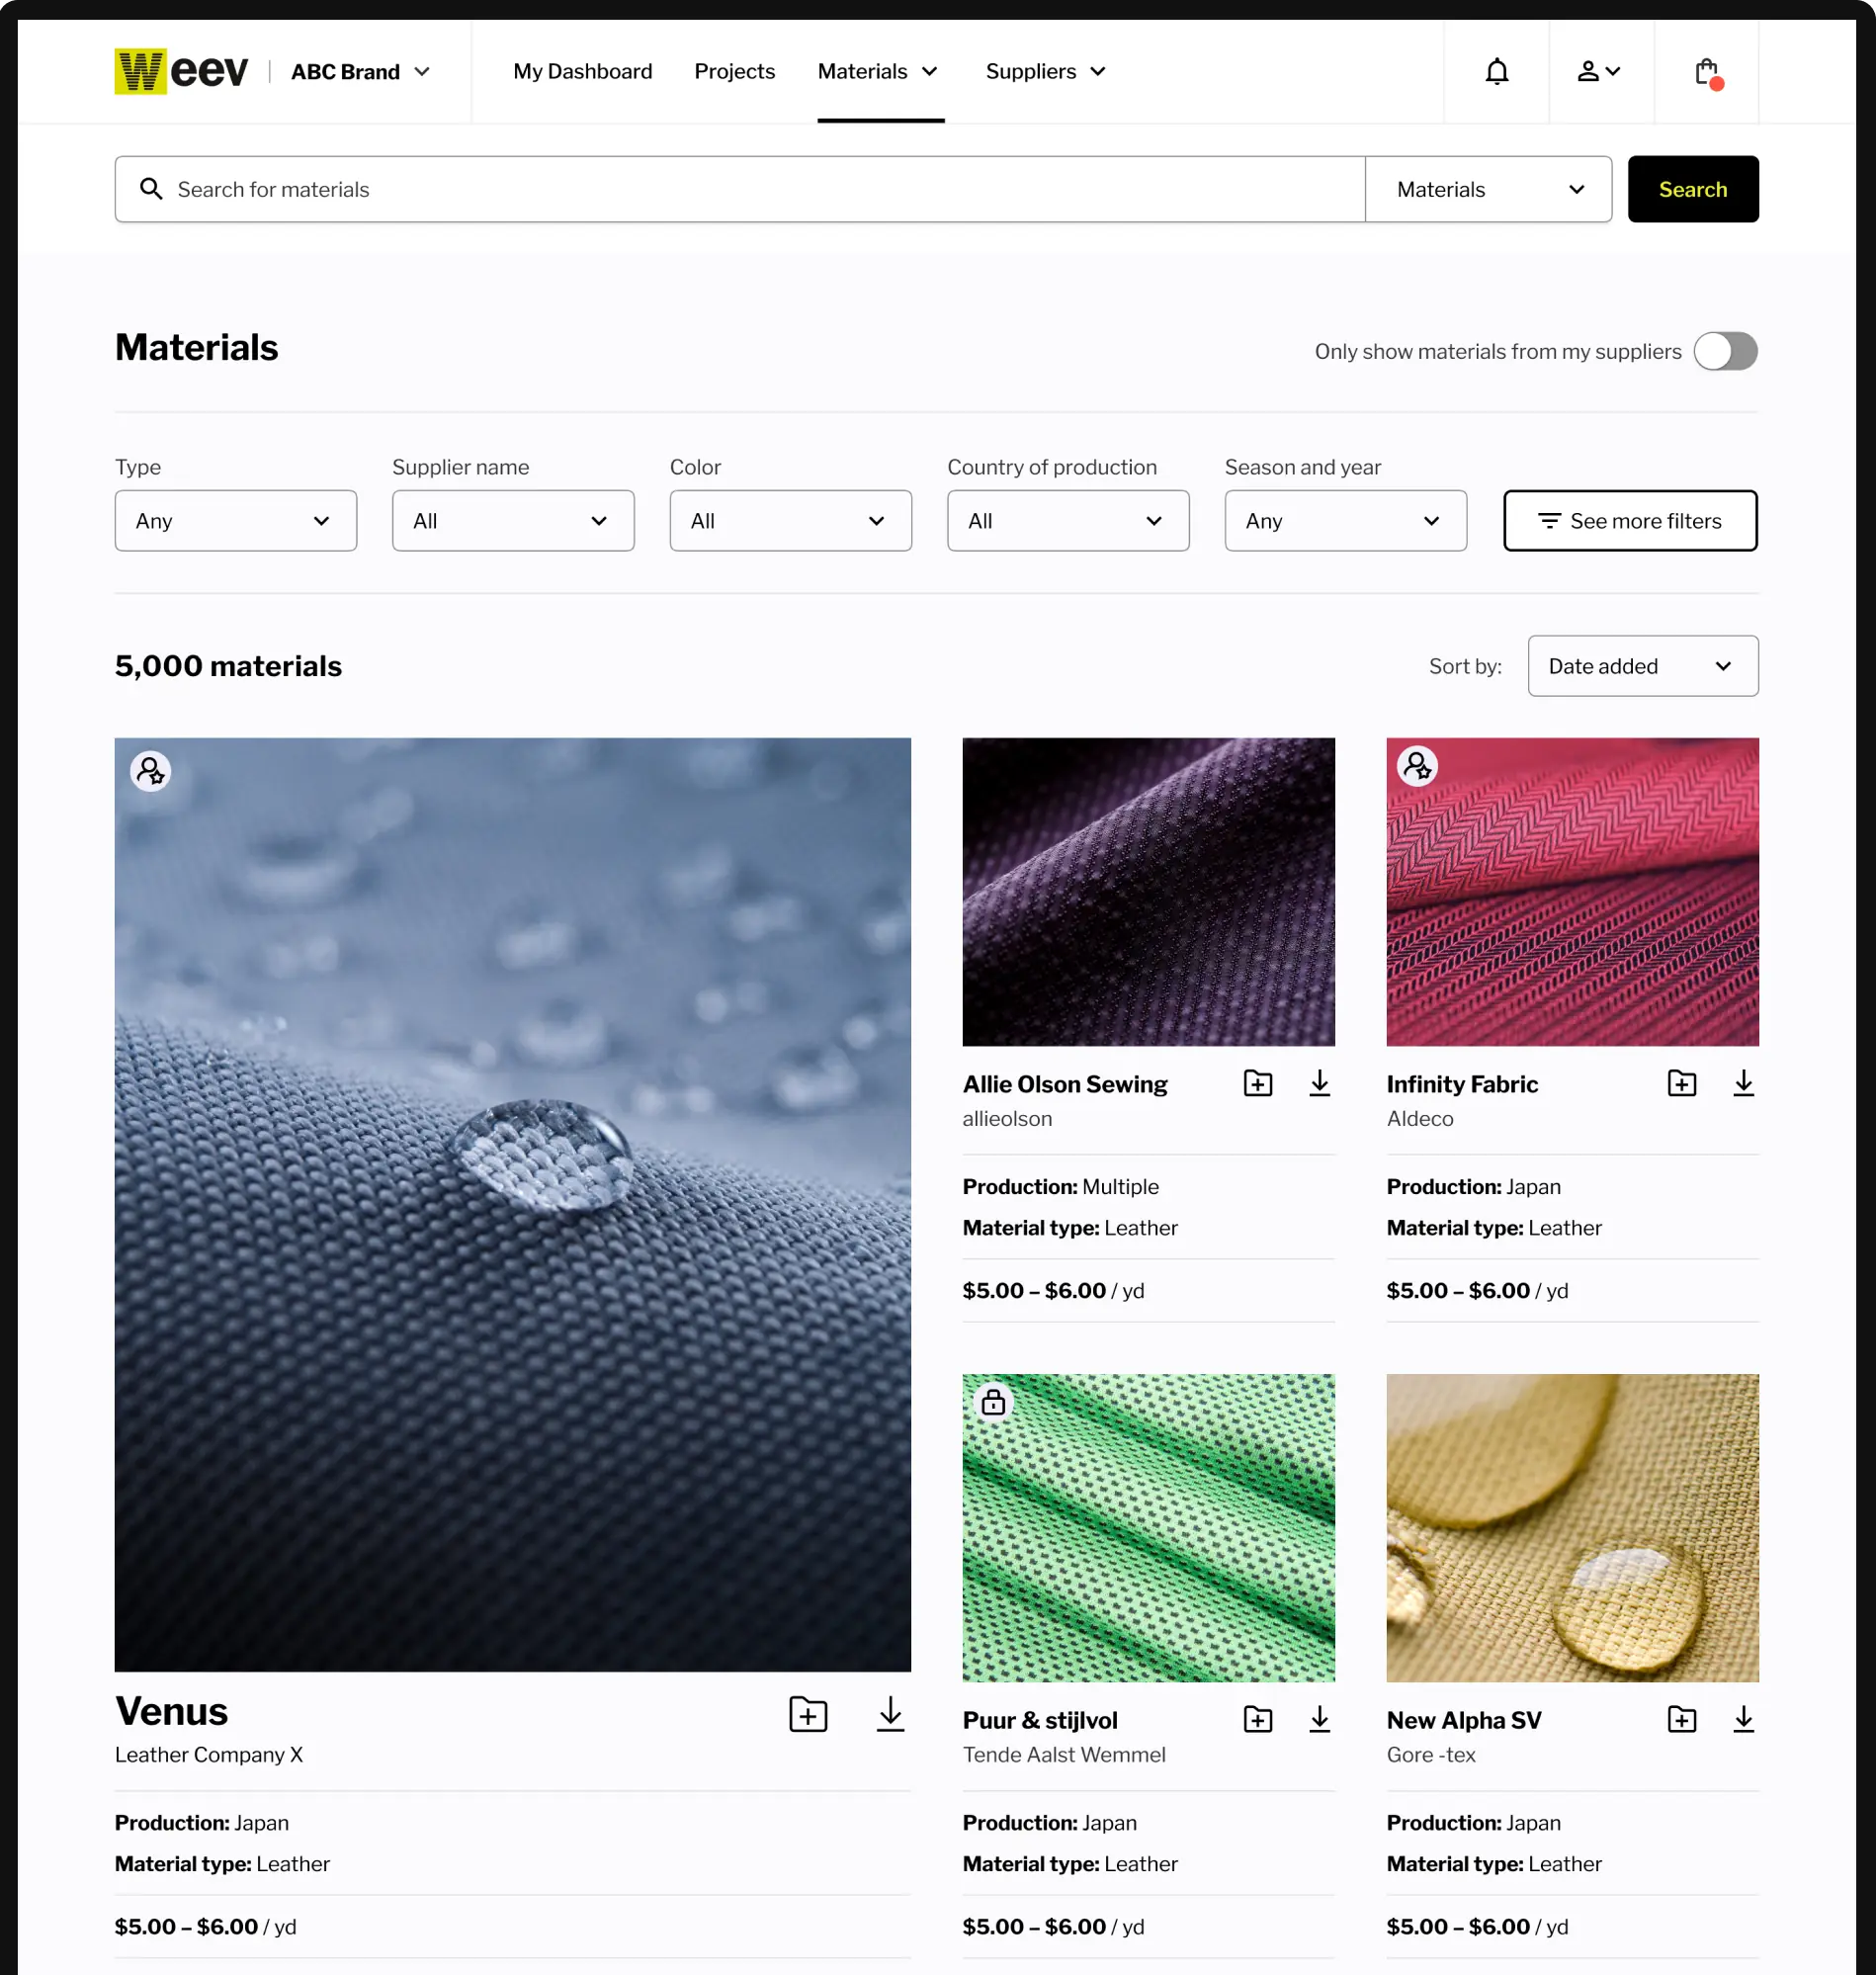 The design for Weev's "Materials" page, showing detailed information on a variety of materials in a clean, visually engaging grid